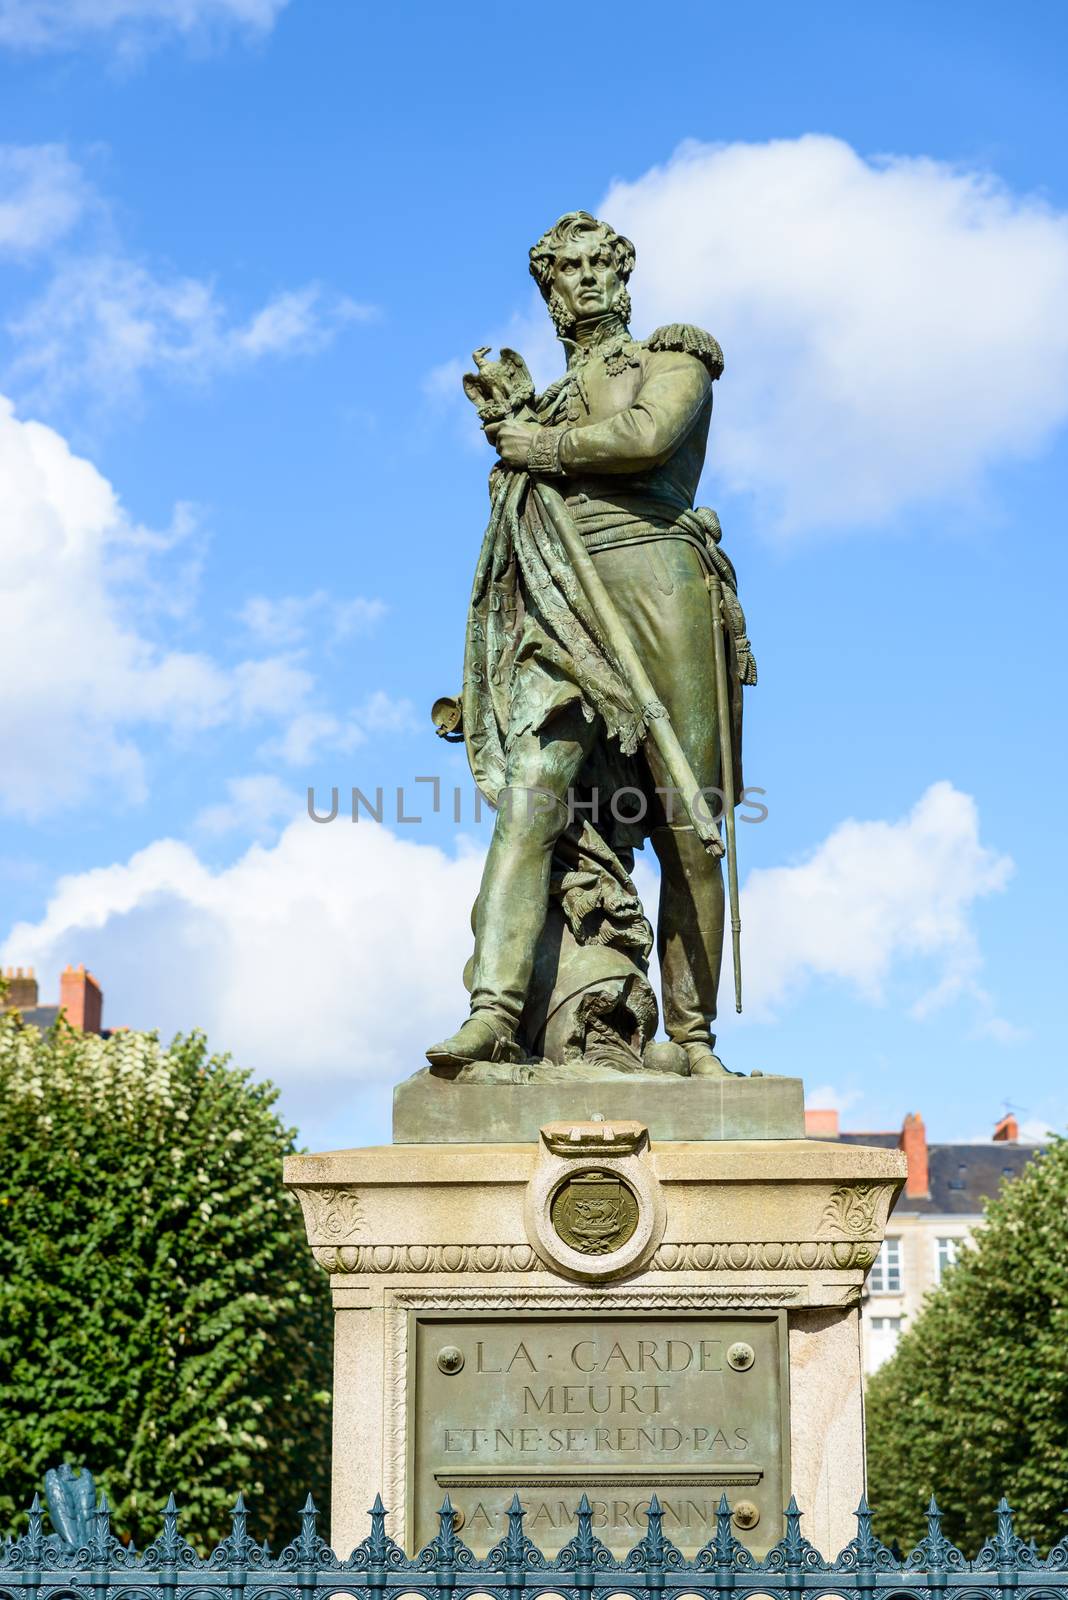 General Cambronne statue in Nantes, France